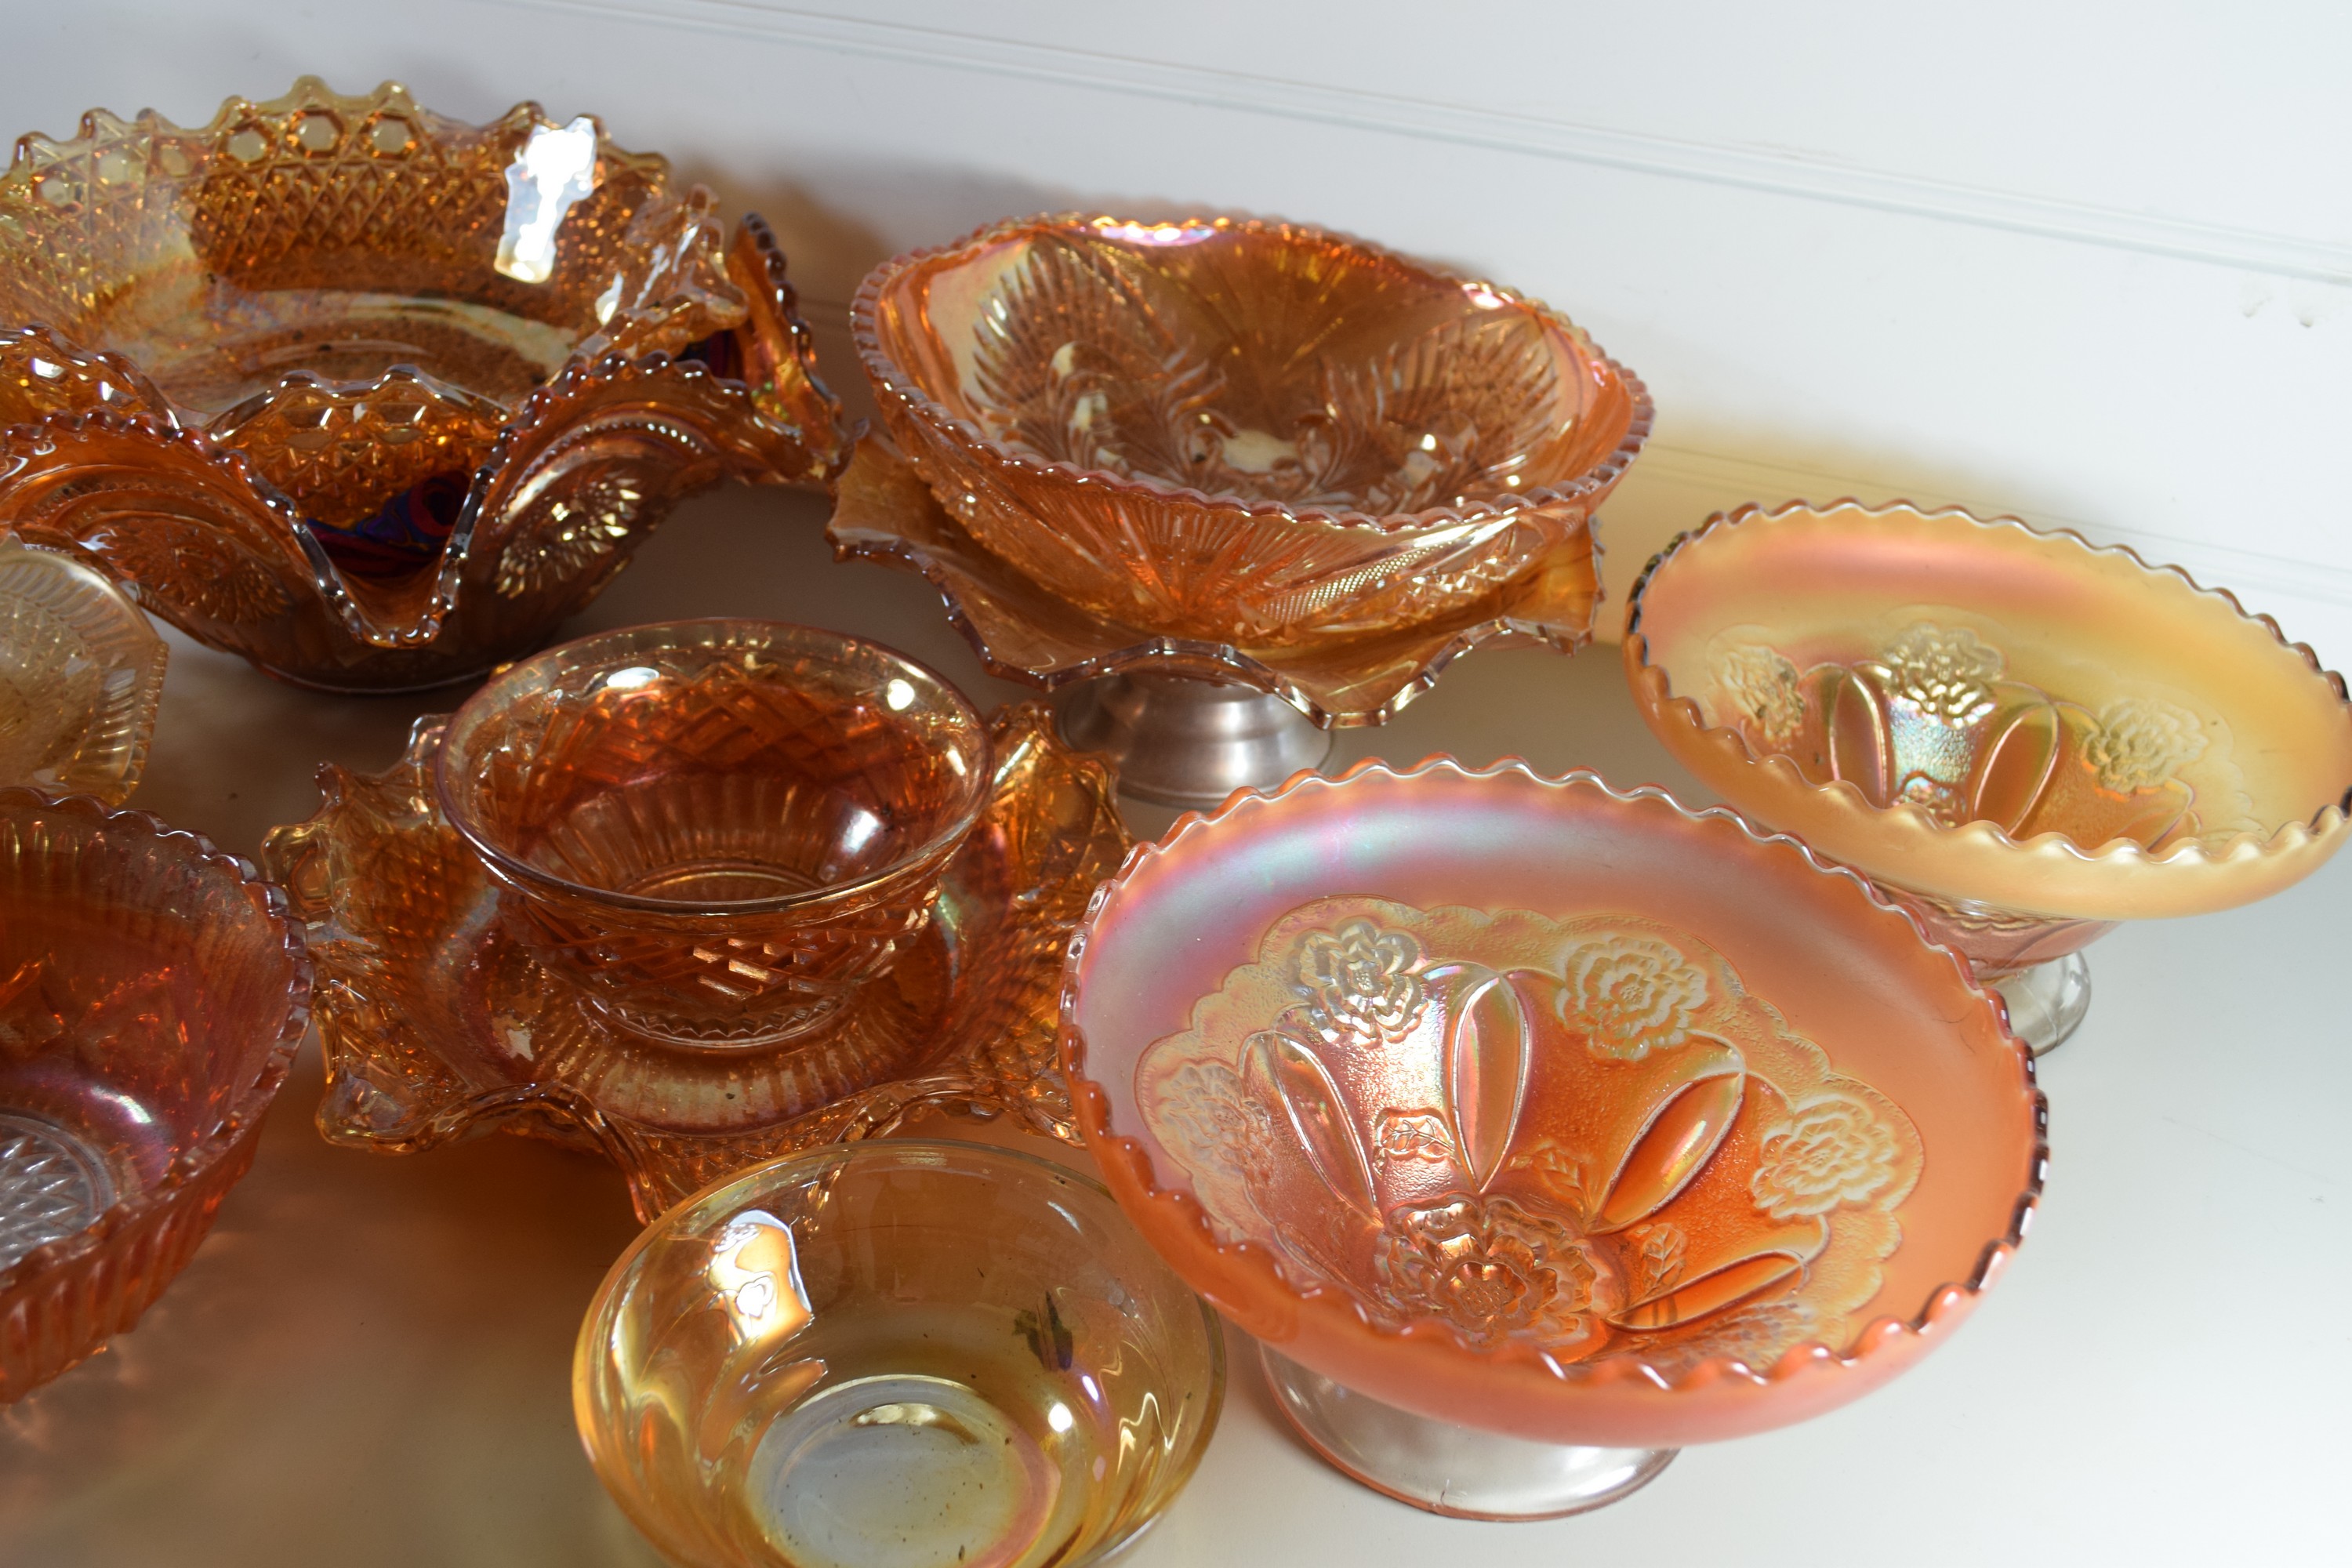 BOX CONTAINING CARNIVAL GLASS, TANGERINE COLOURED WITH FLORAL DESIGNS - Image 3 of 3